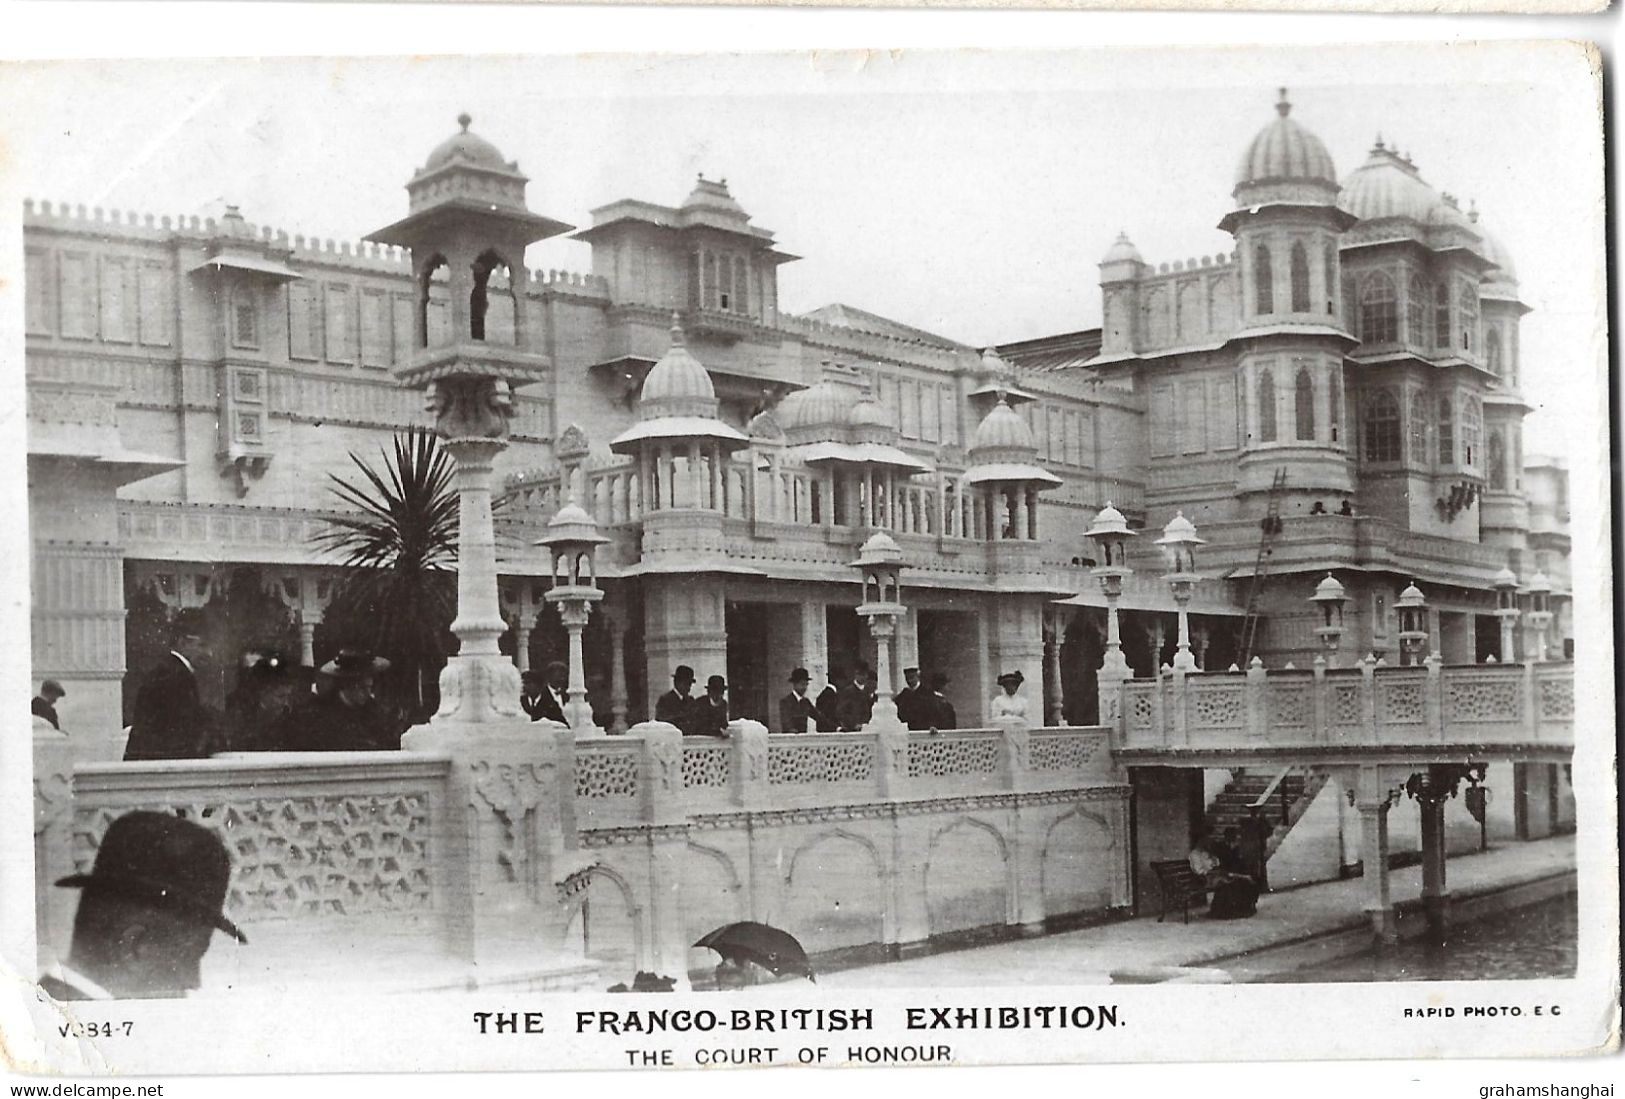 4 postcards lot UK London Franco-British Exhibition 1908 various views all posted